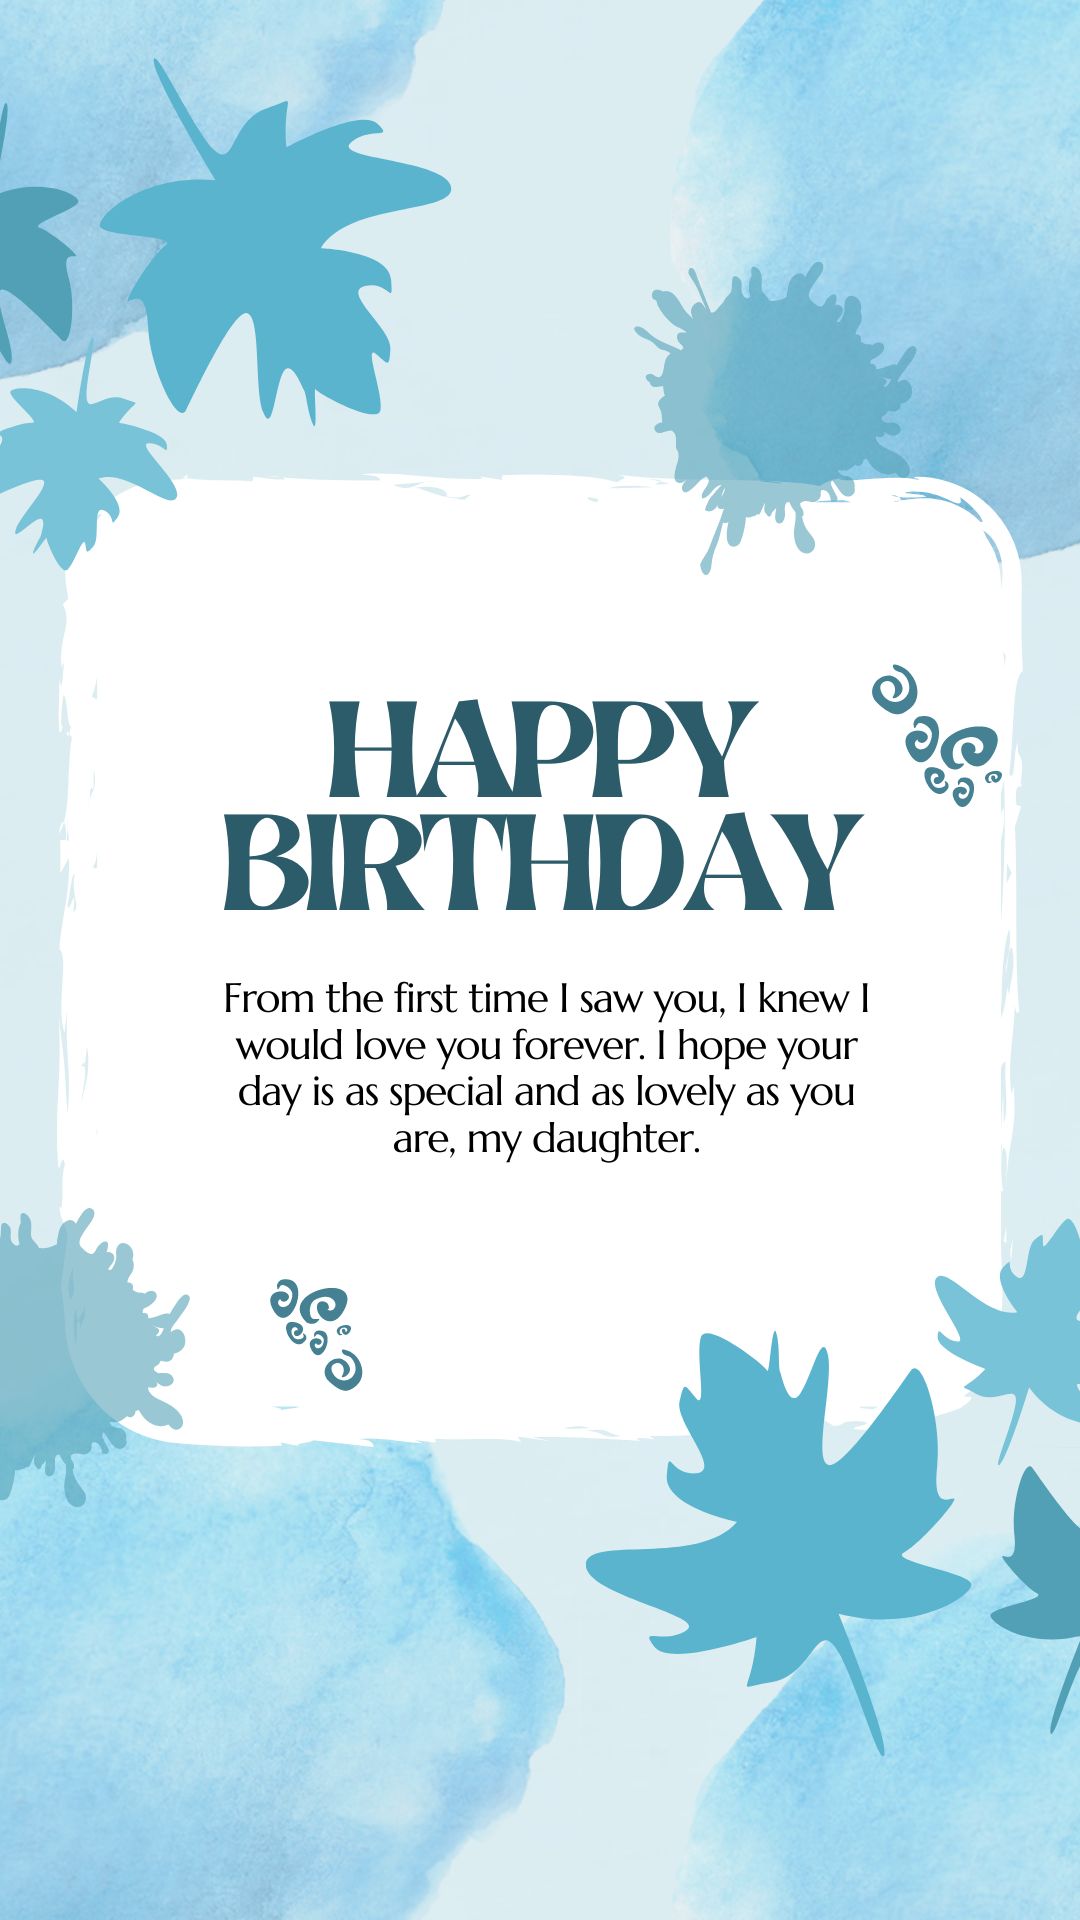 blue leaf minimalist birthday greetings images for daughter